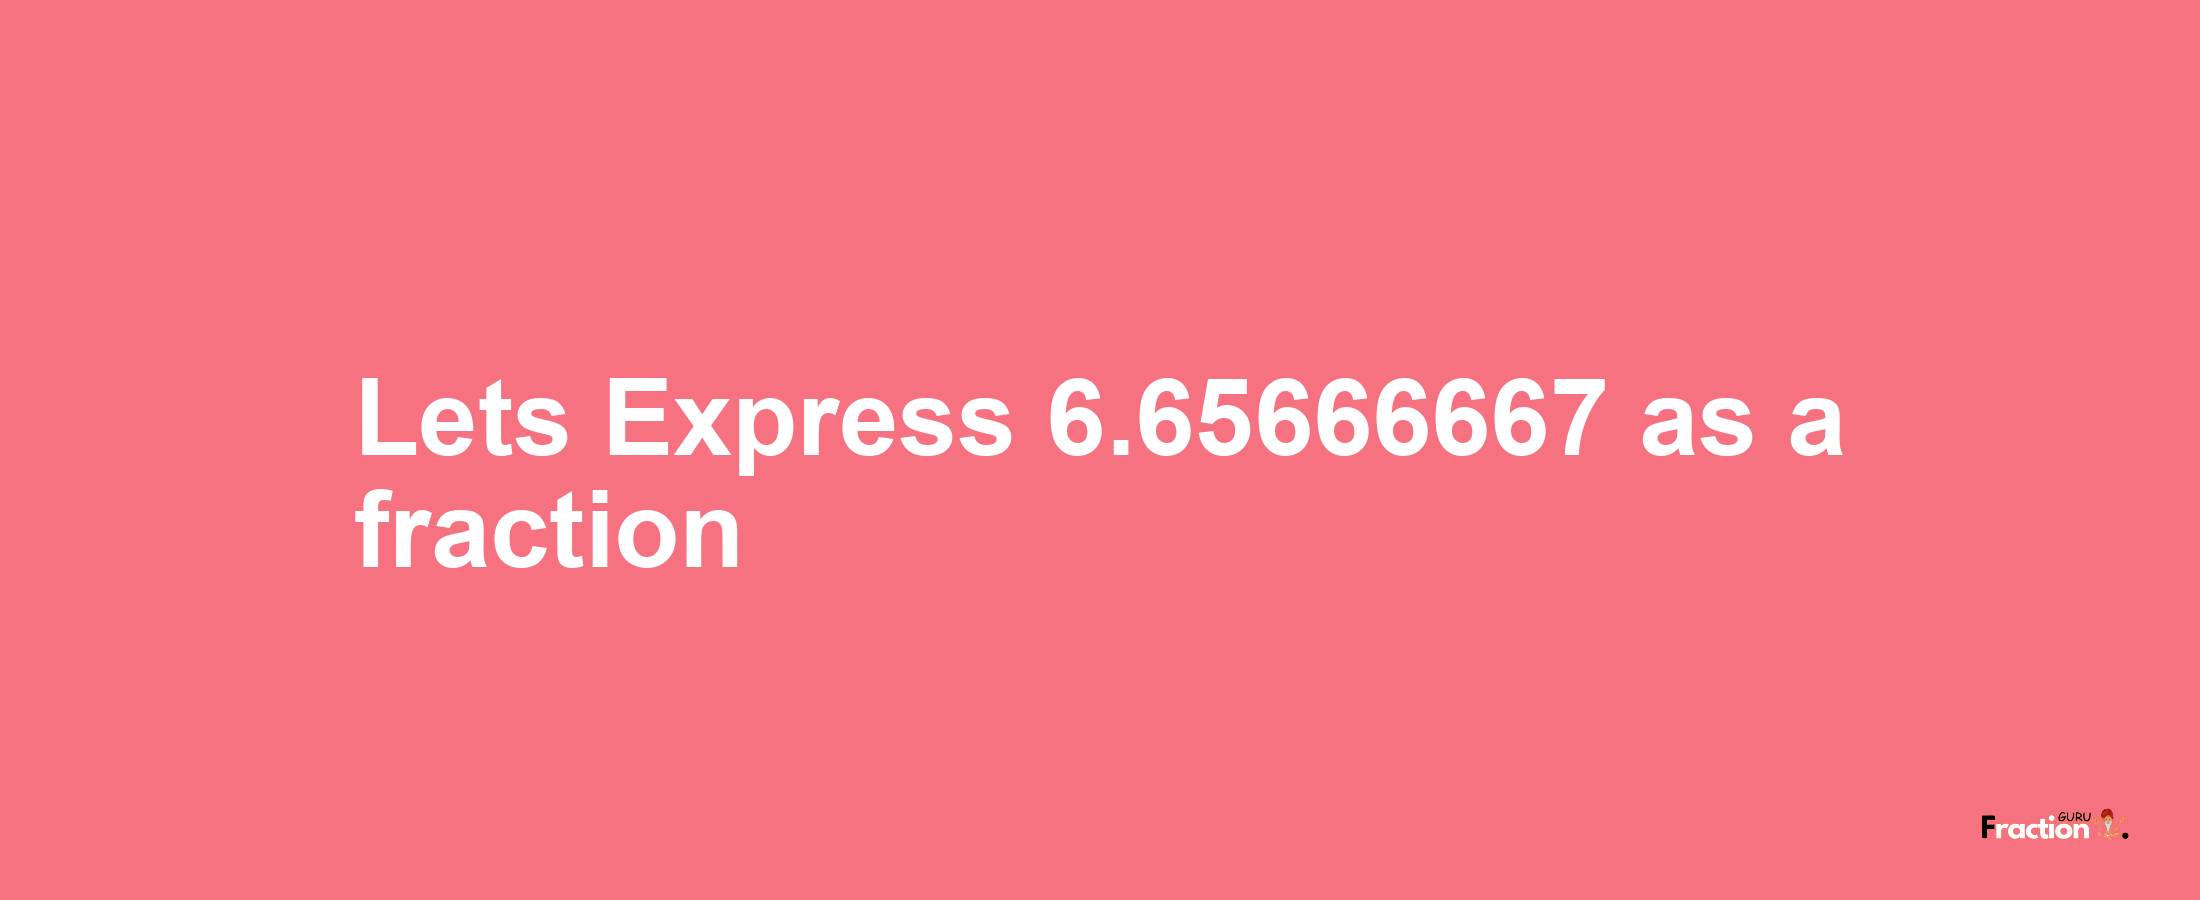 Lets Express 6.65666667 as afraction